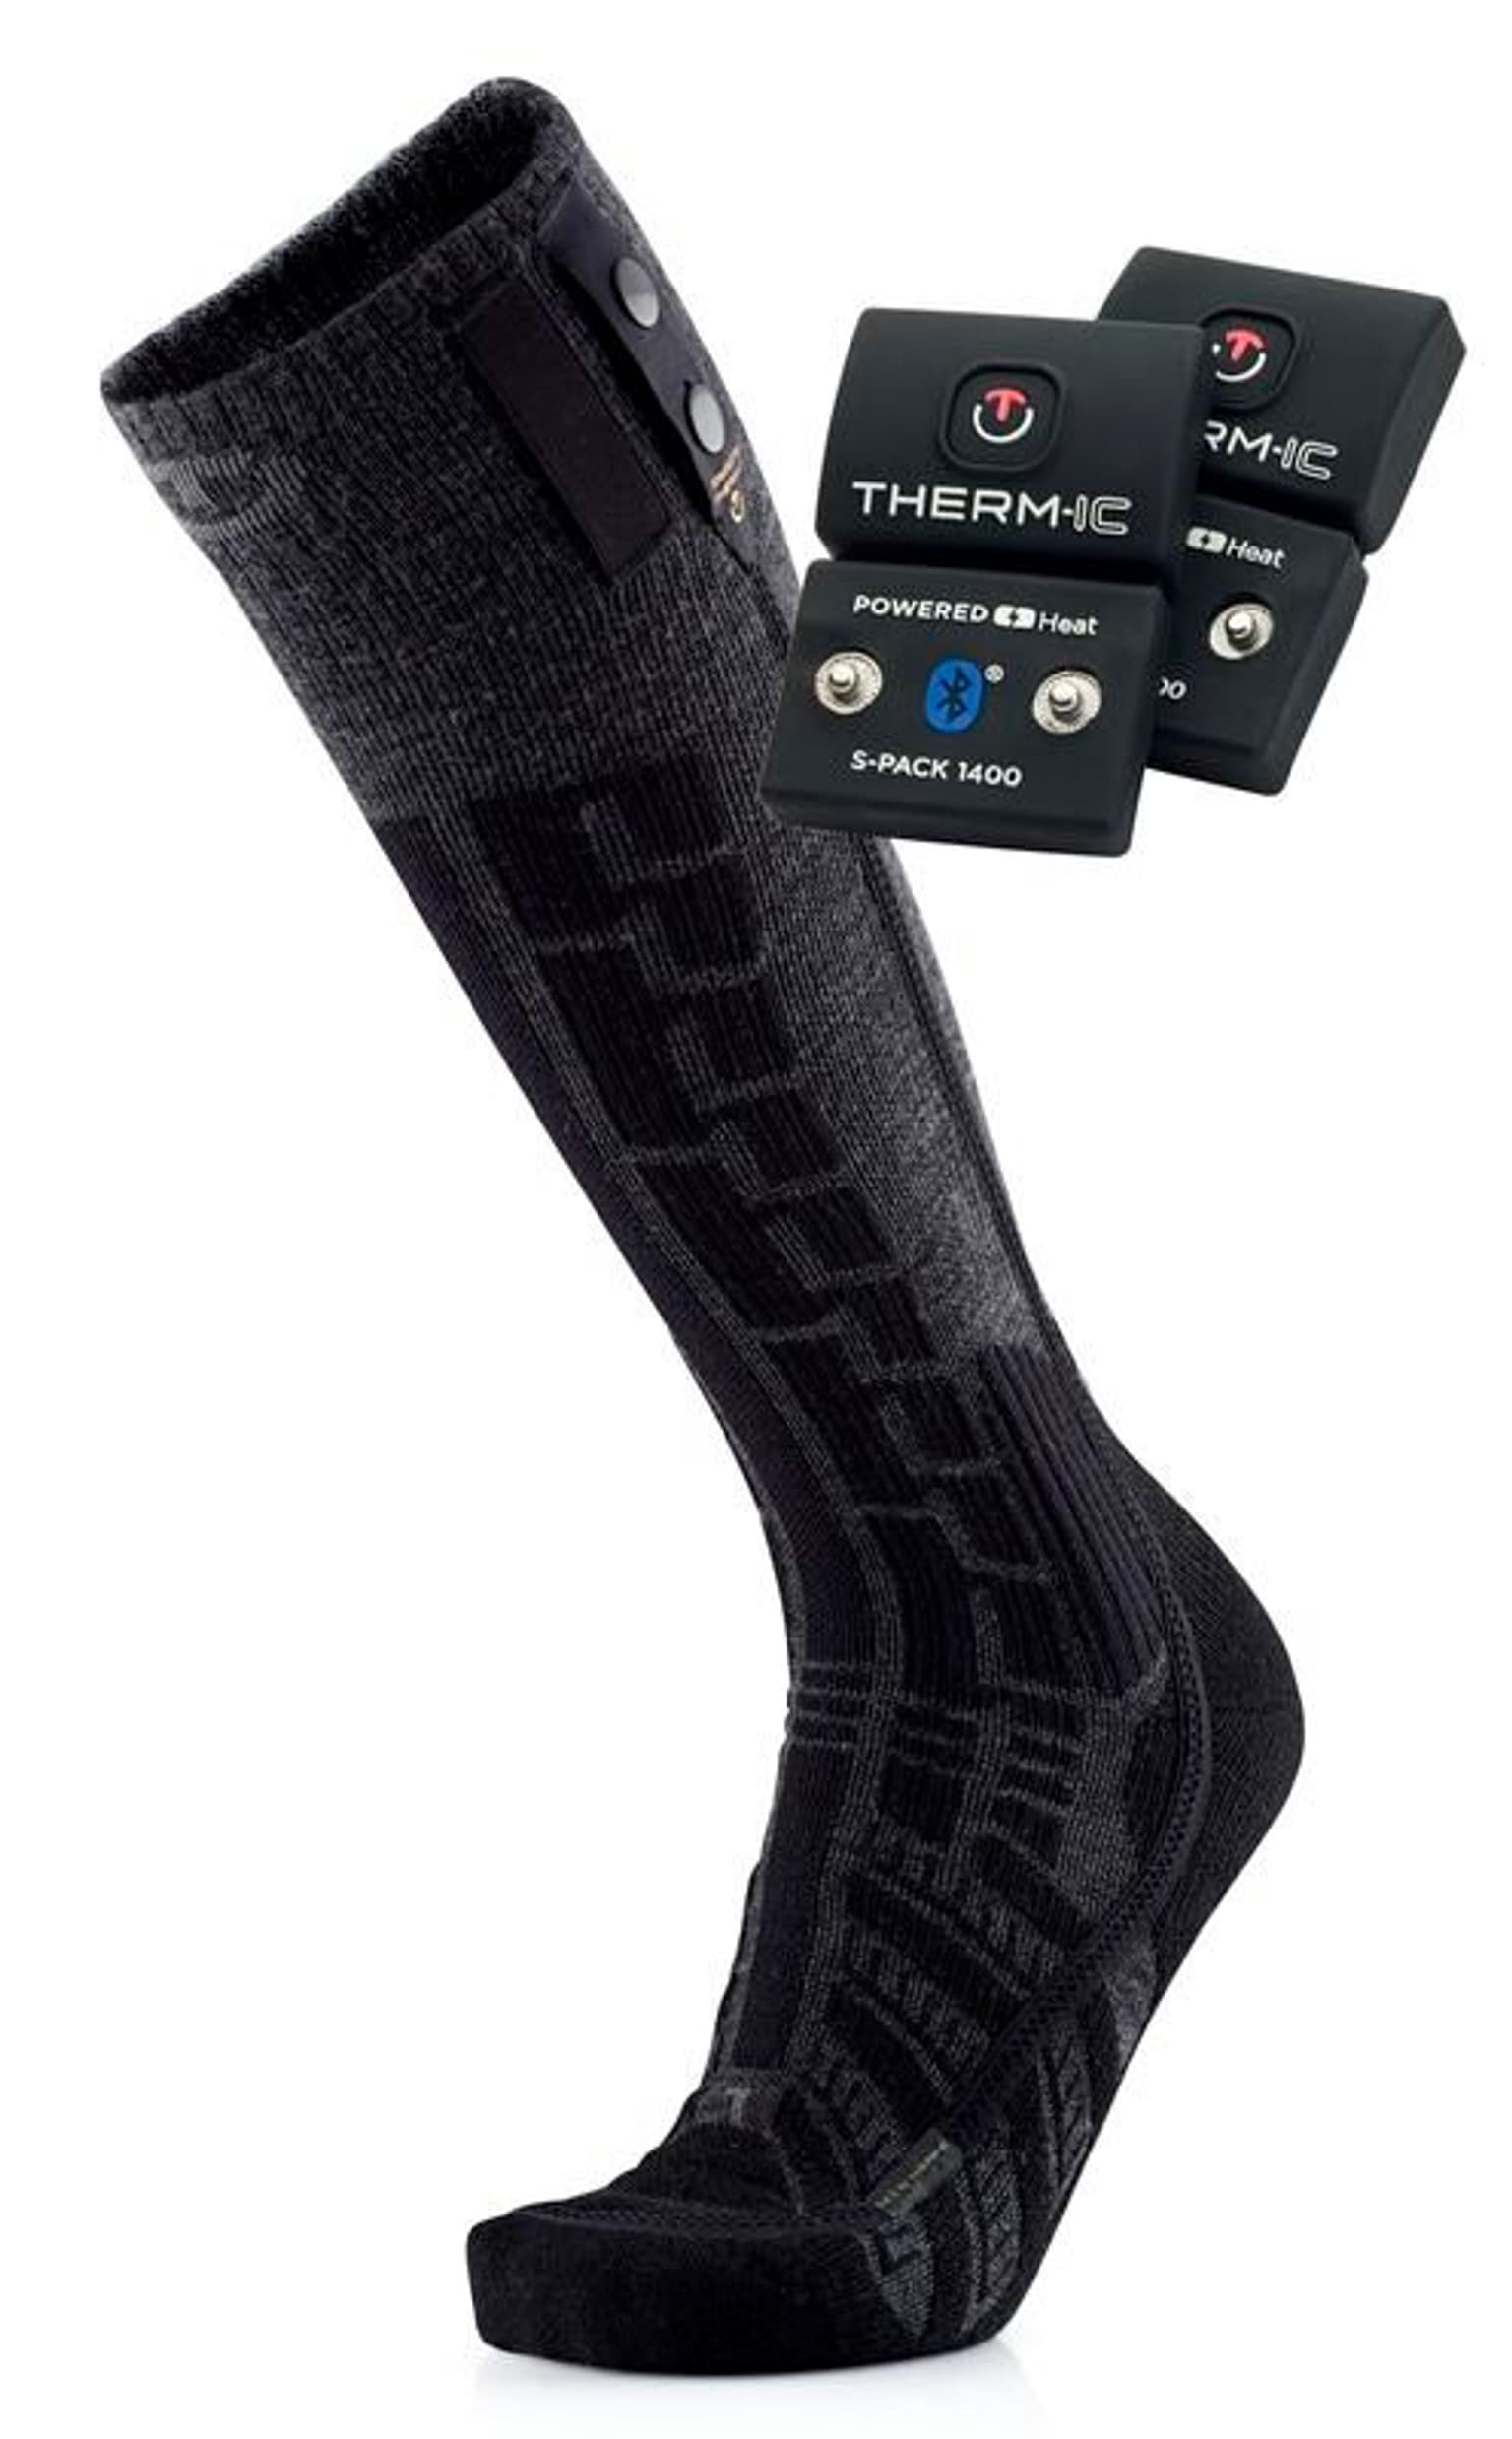 Thermic Thermic Set Powersocks Ultra warm Comfort inkl.S-Pack 1400 BT Chaussettes chauffantes noir 1